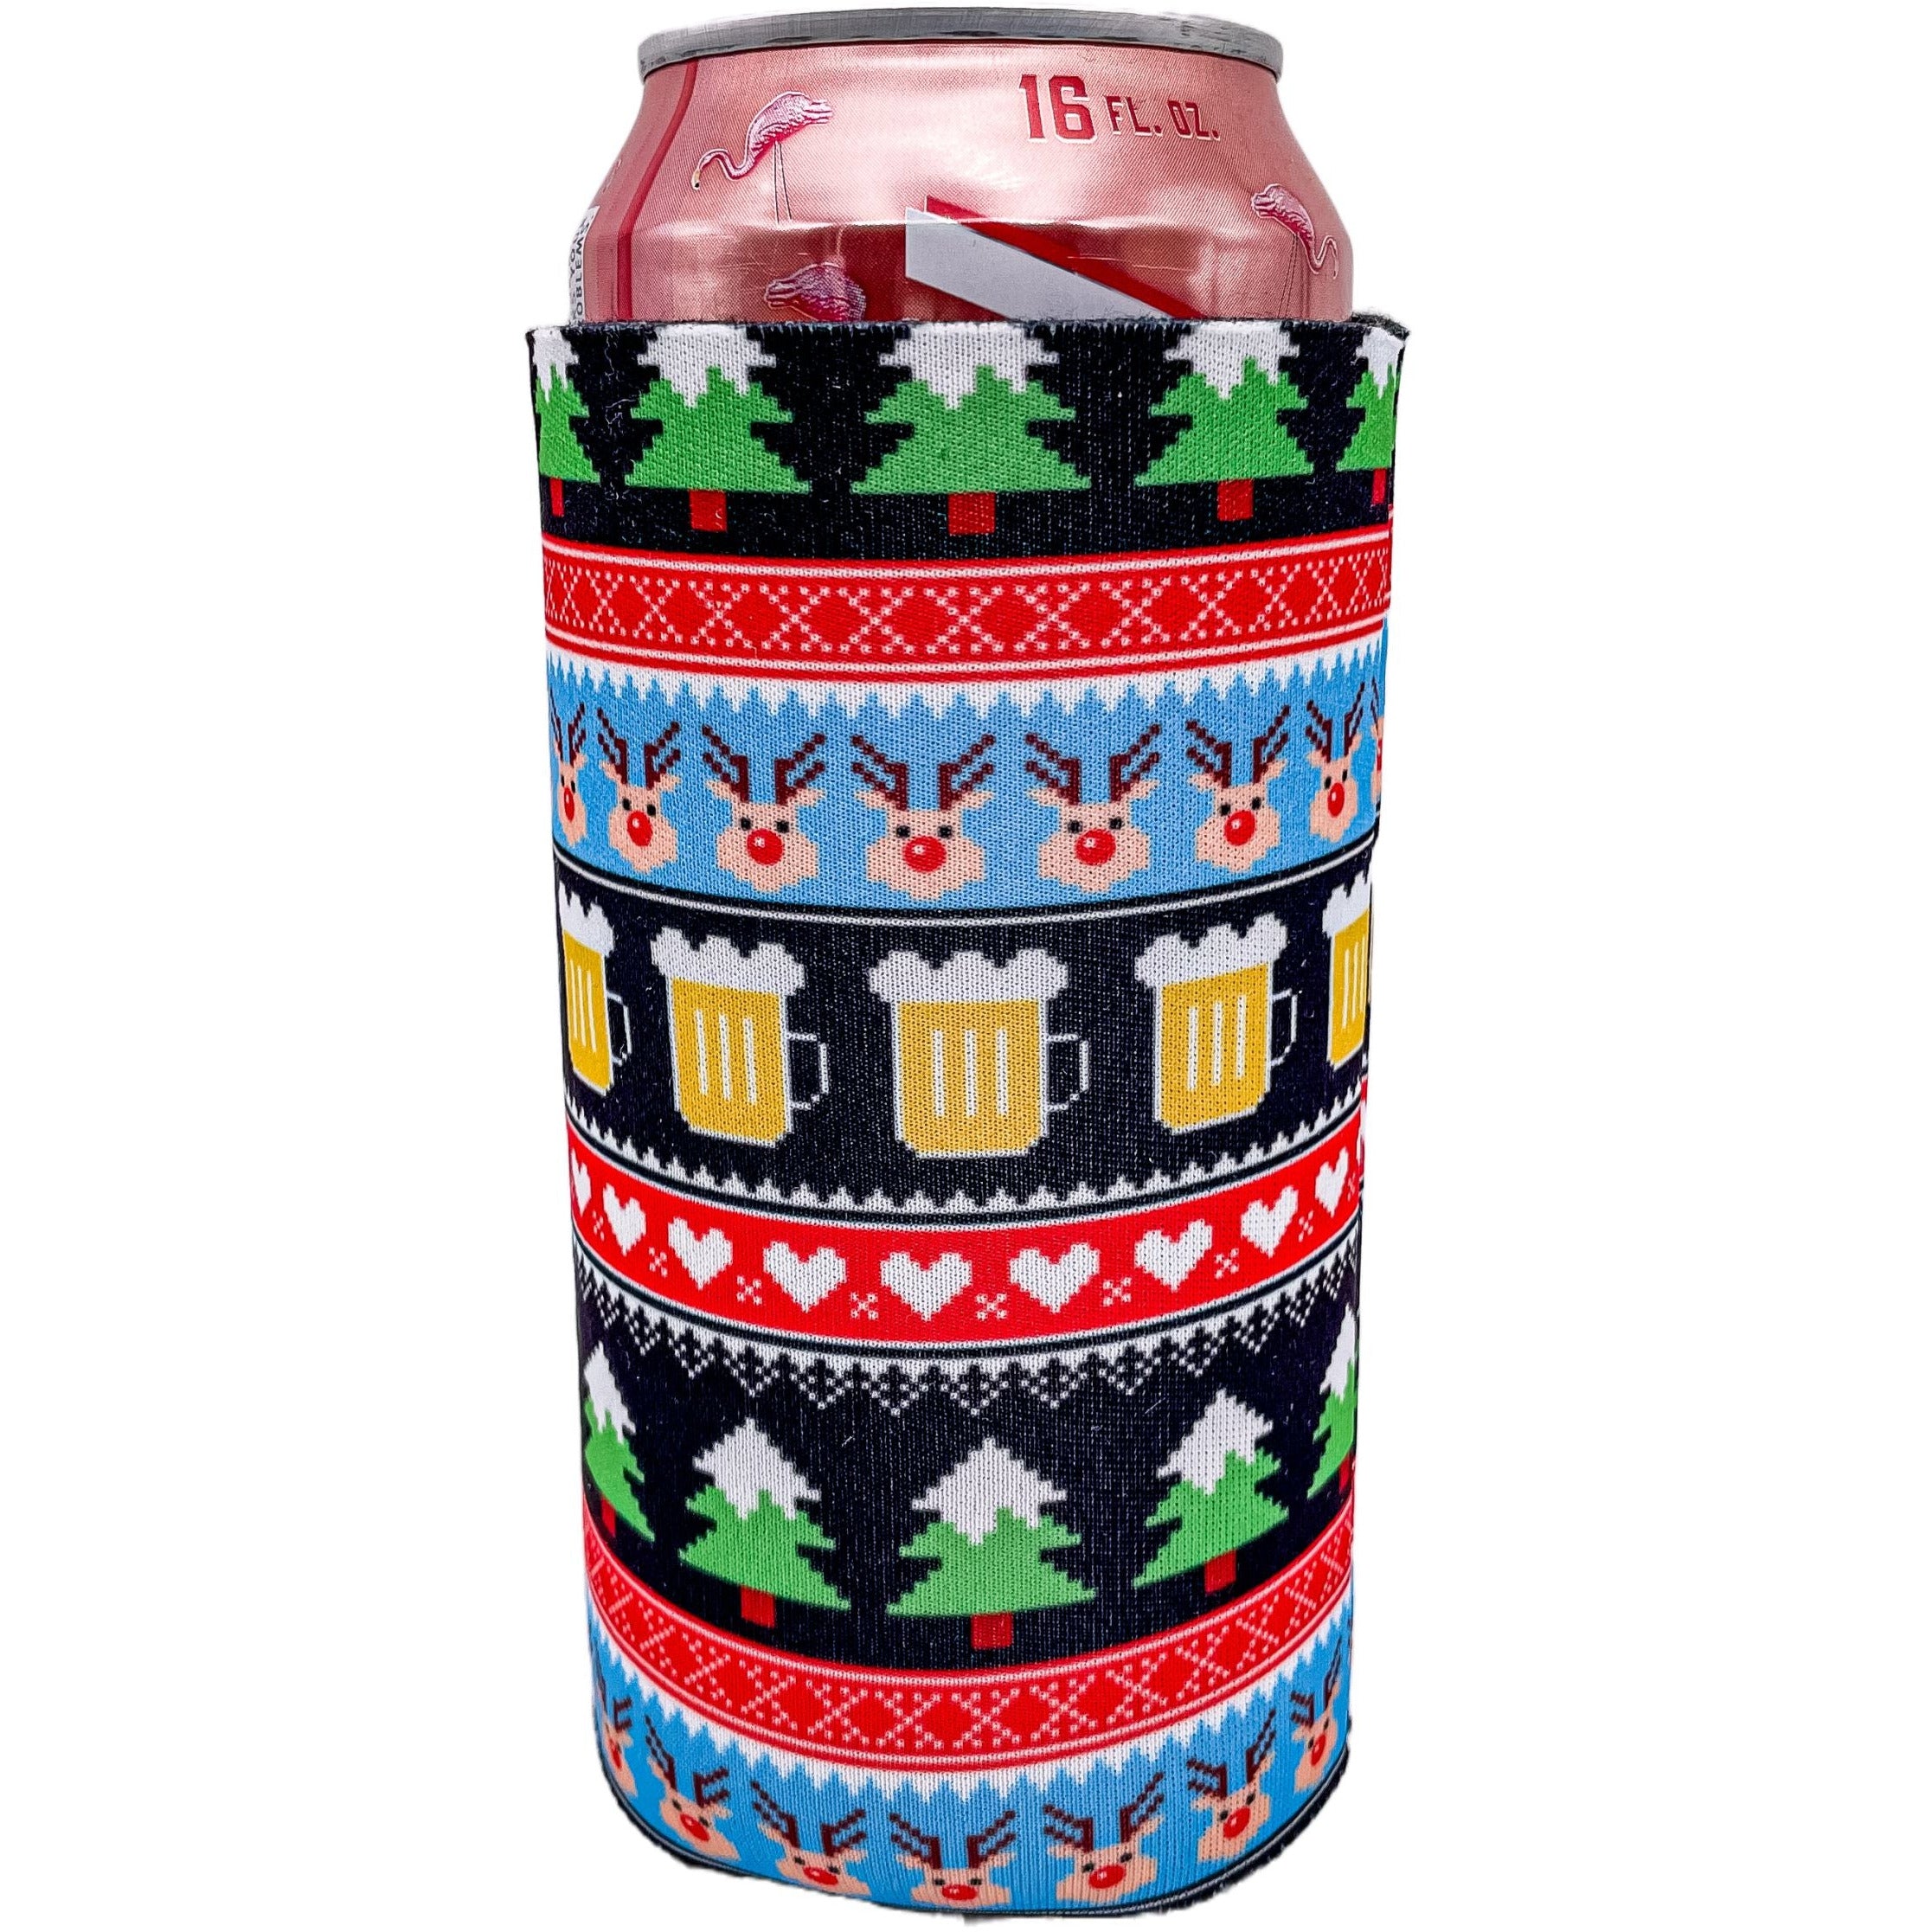 Christmas Holiday Pattern 16 oz. Can Coolie Variety 6 Party Pack